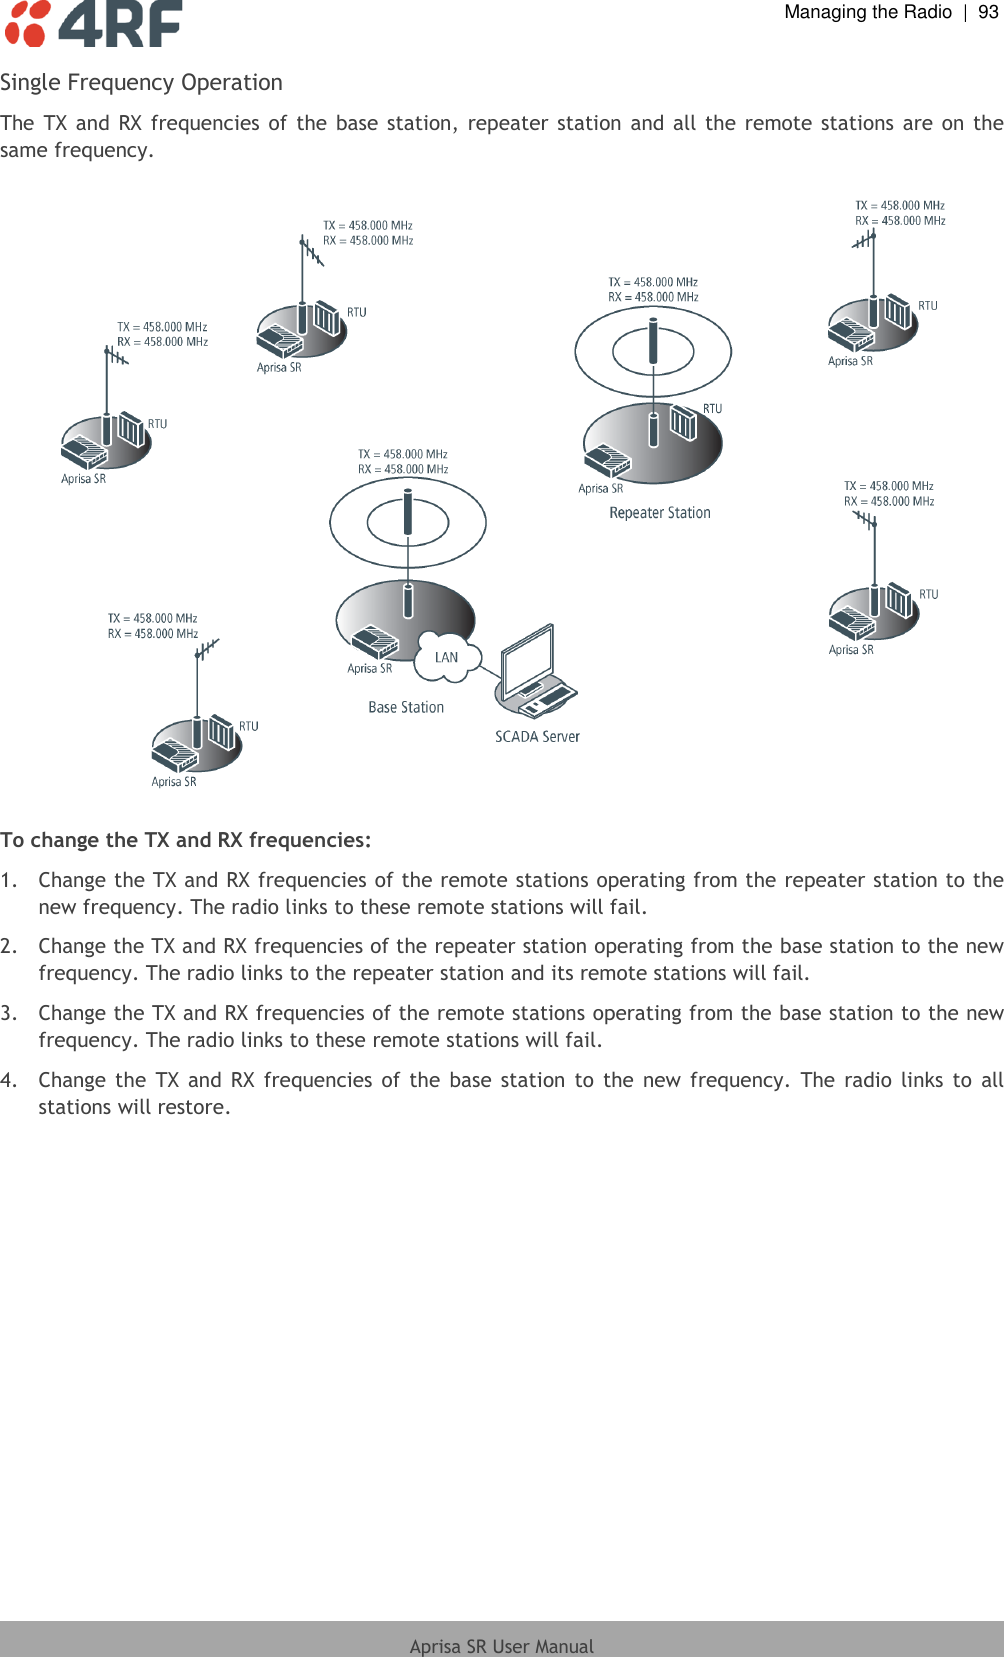  Managing the Radio  |  93  Aprisa SR User Manual  Single Frequency Operation The TX  and  RX frequencies of  the  base  station,  repeater  station and all  the  remote  stations are on  the same frequency.    To change the TX and RX frequencies: 1.  Change the TX and RX frequencies of the remote stations operating from the repeater station to the new frequency. The radio links to these remote stations will fail. 2.  Change the TX and RX frequencies of the repeater station operating from the base station to the new frequency. The radio links to the repeater station and its remote stations will fail. 3.  Change the TX and RX frequencies of the remote stations operating from the base station to the new frequency. The radio links to these remote stations will fail. 4.  Change  the  TX and  RX  frequencies  of  the  base  station  to  the  new  frequency.  The  radio  links  to  all stations will restore.  